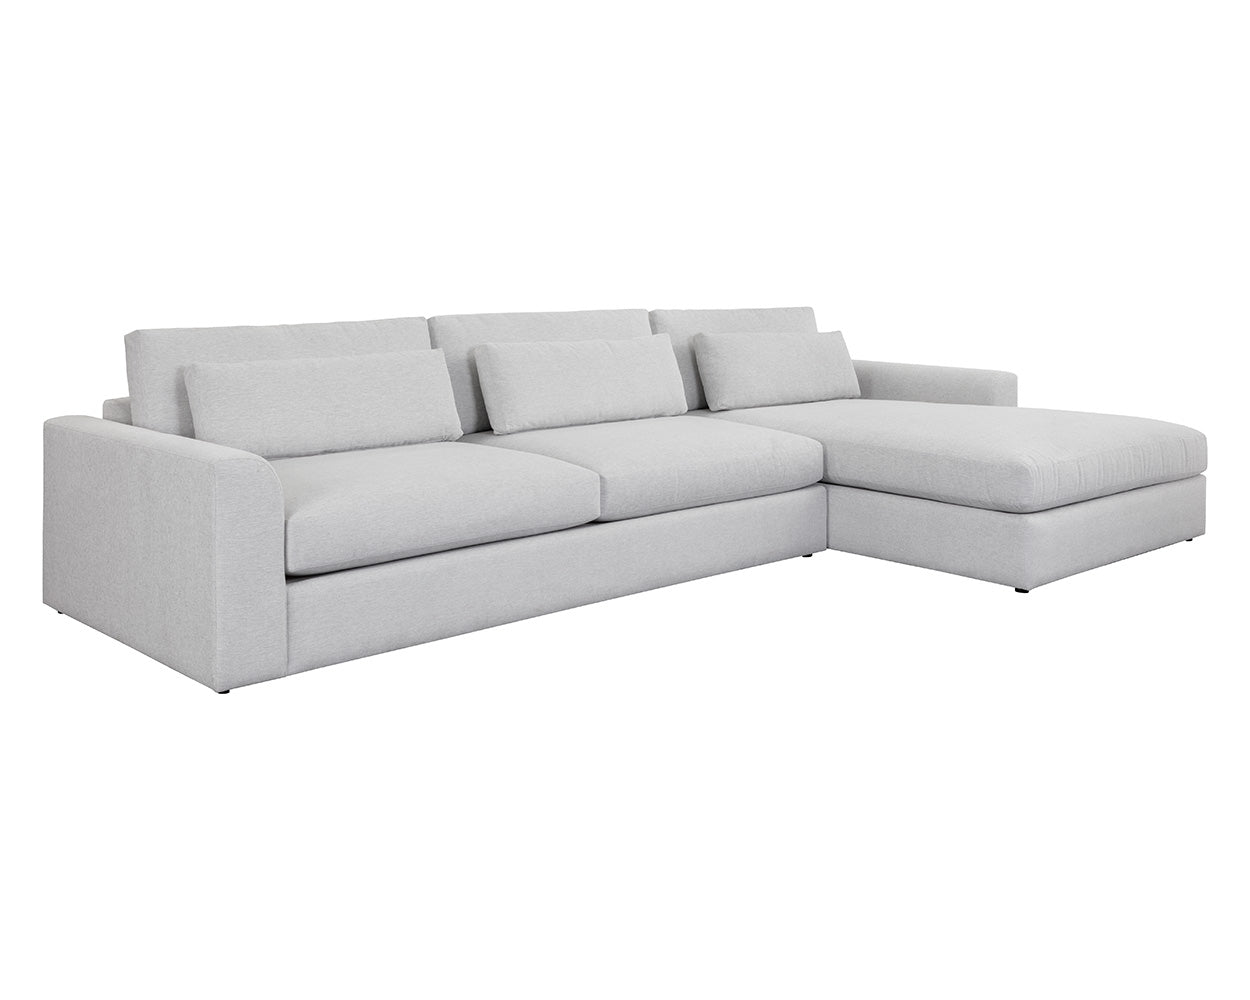 Picture of Merrick Sofa Chaise